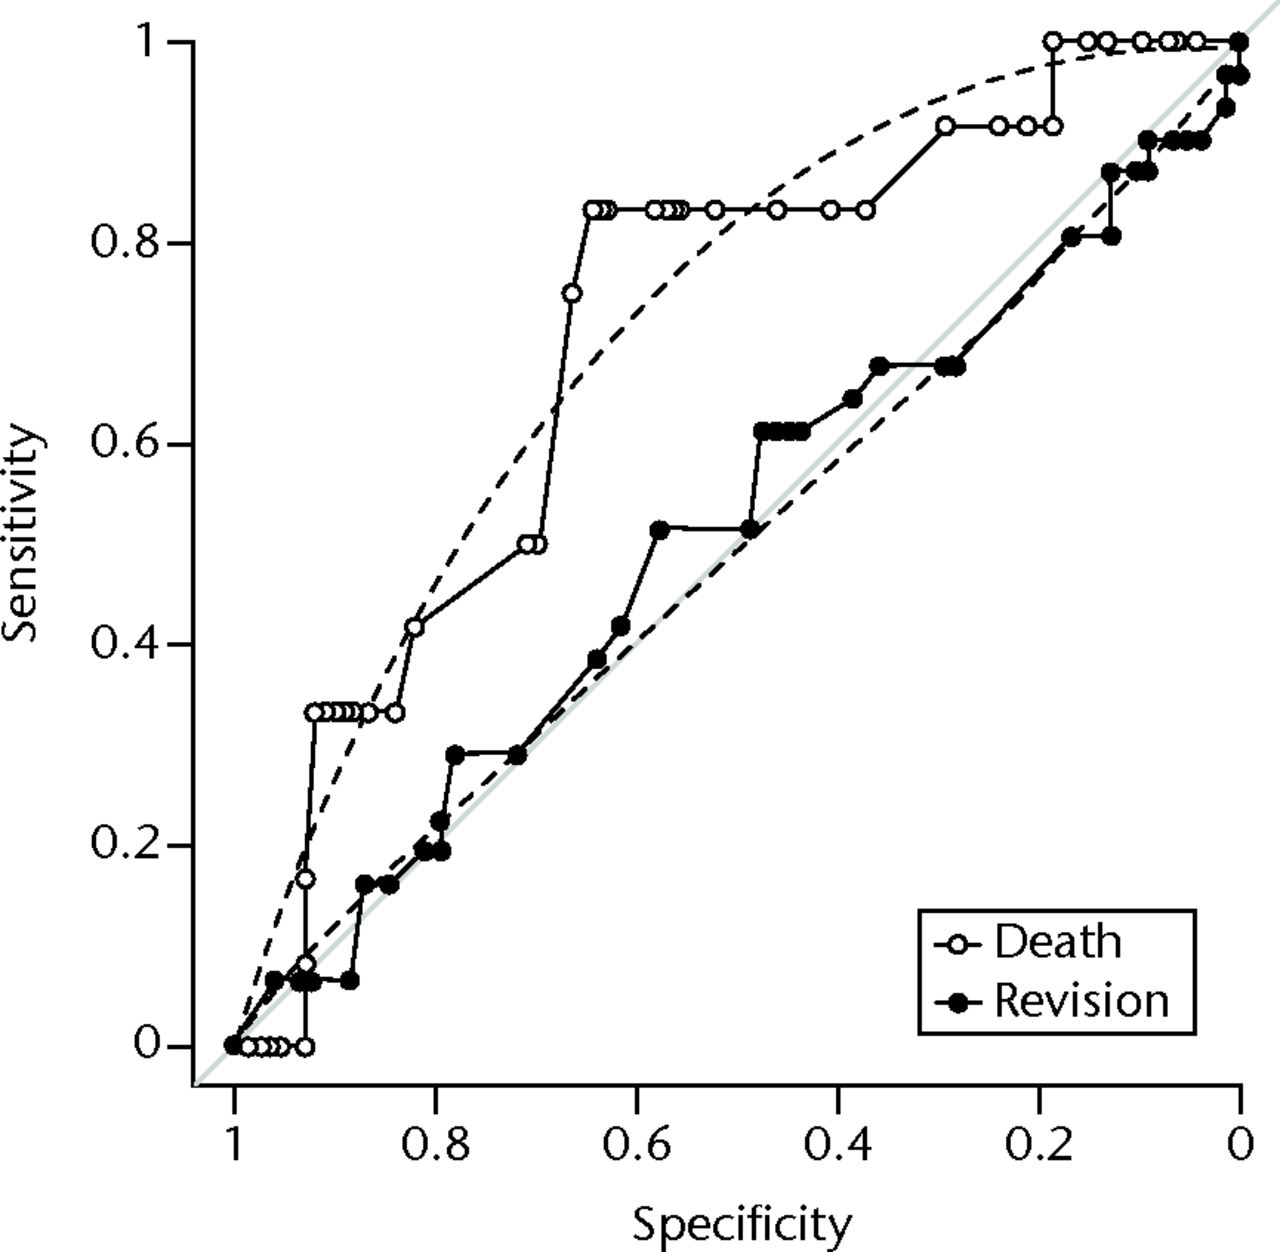 Fig. 1 
            Receiver operating characteristic (ROC)
curves for WHiT EQ-5D at six weeks and subsequent death and revision
within 12 months; data (solid) and smoothed curves (dashed)
          